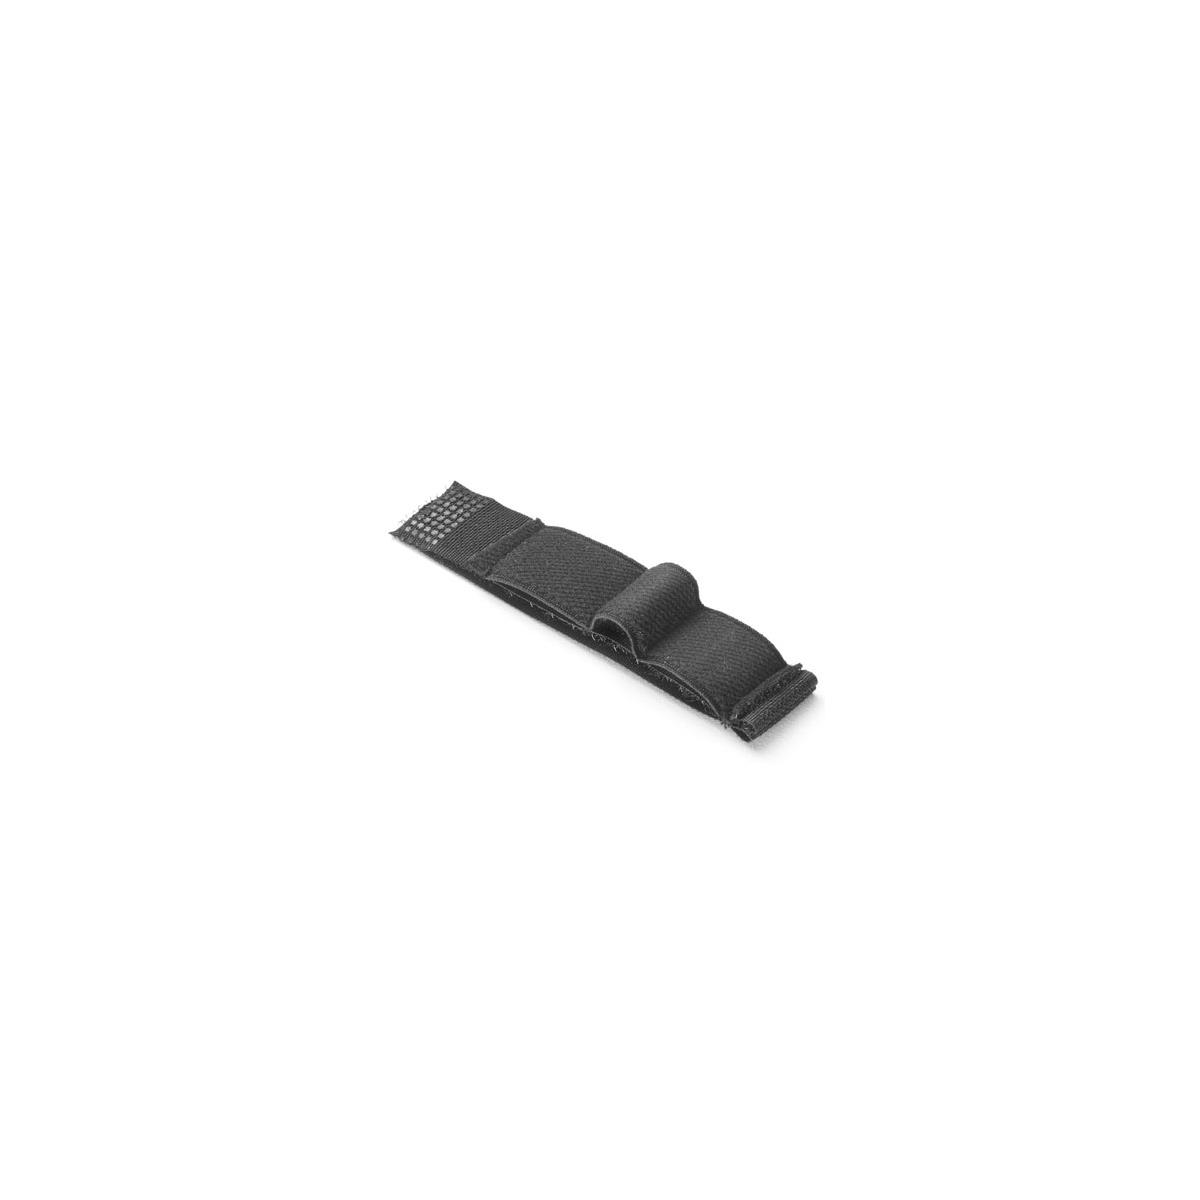 Image of Audio-Technica AT8468 Violin Mount for Audio-Technica Lavalier Microphones